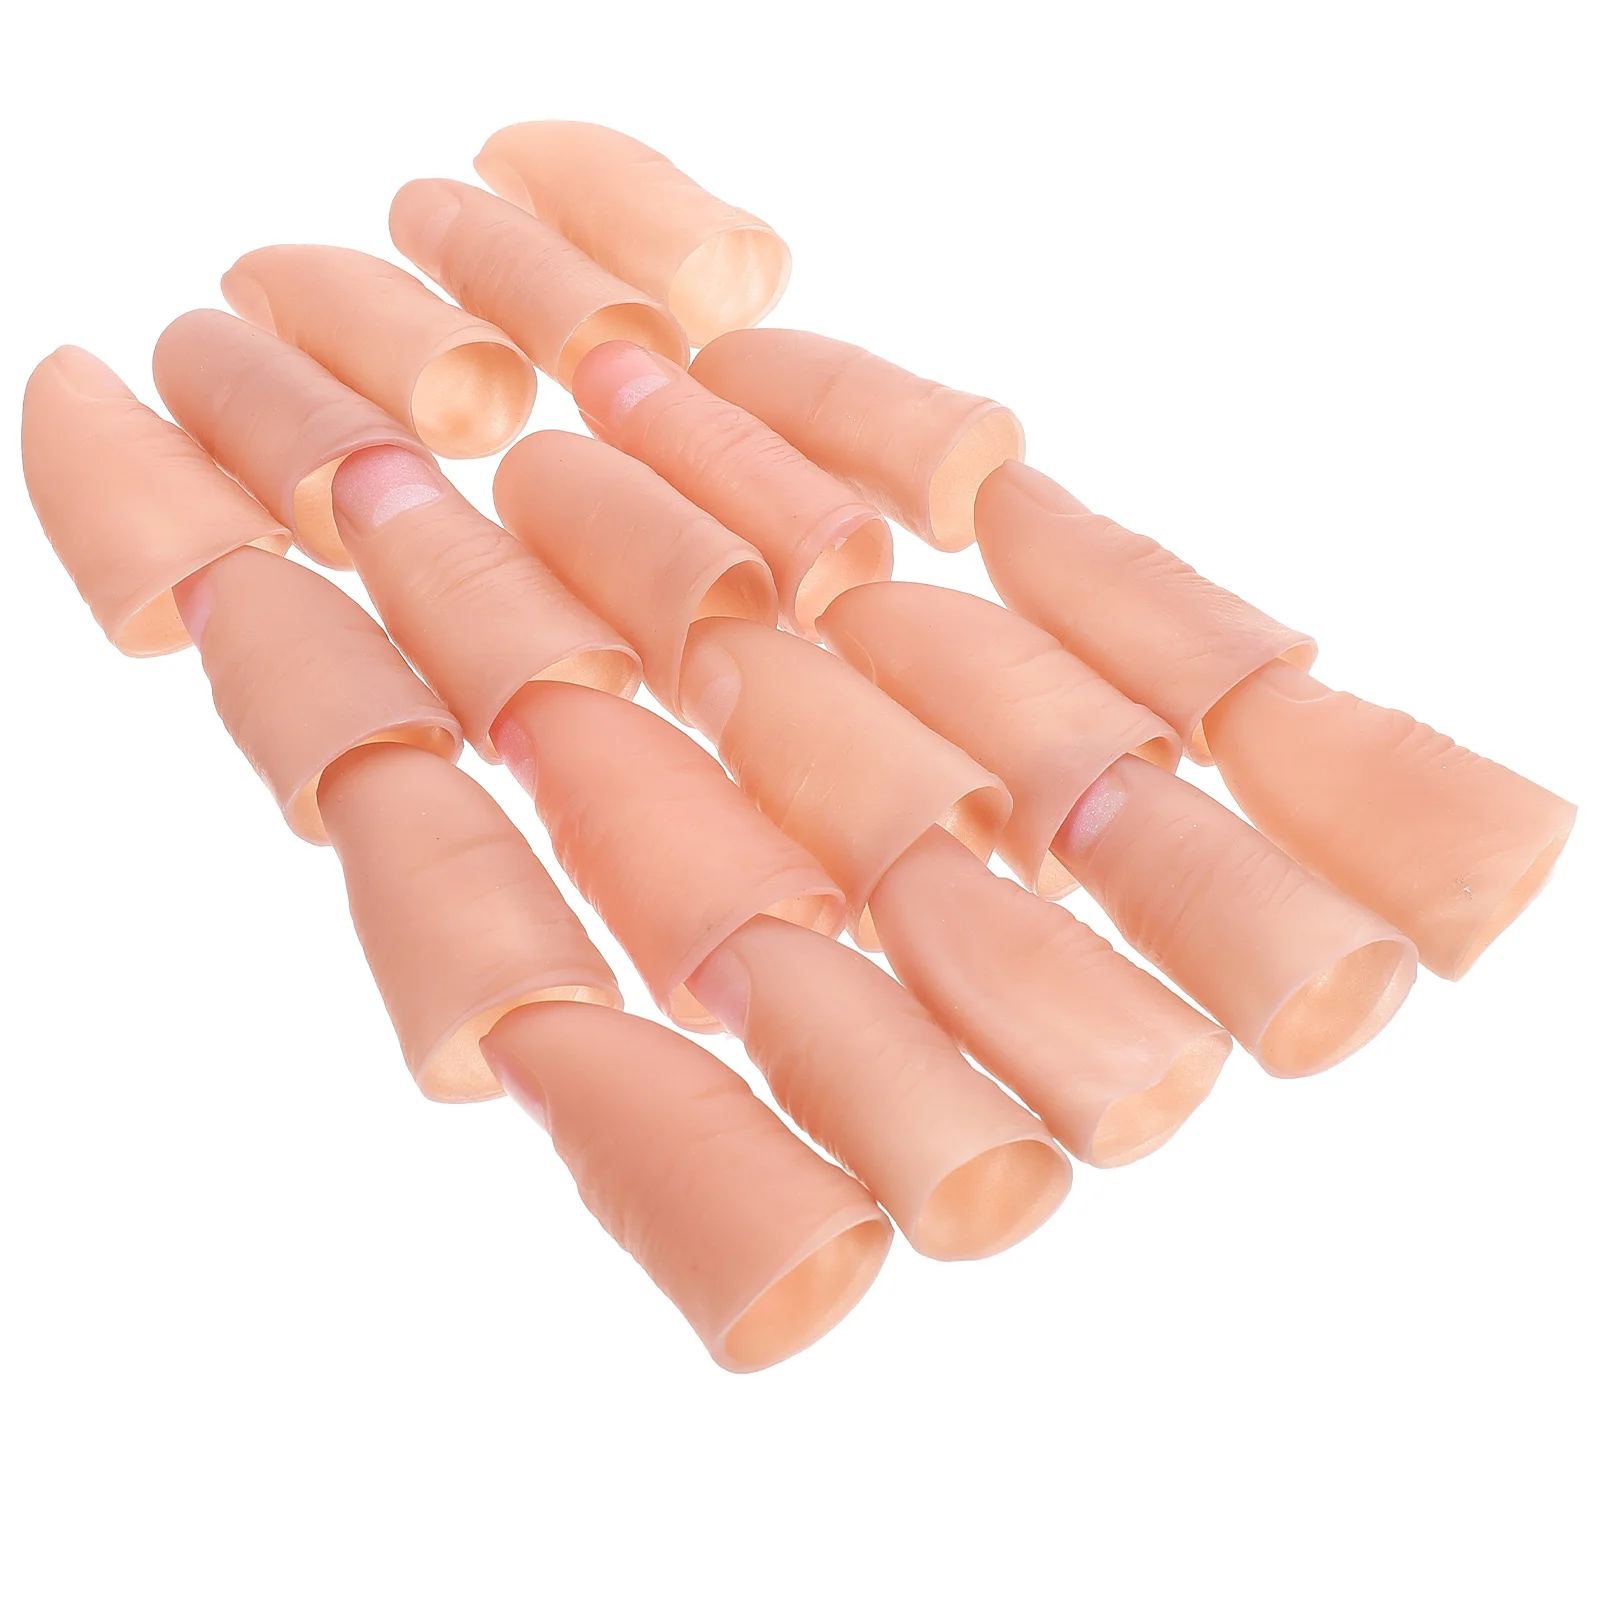 

20 Pcs Simulation Props Conjure Tricks Finger Sleeve Interesting Fake Thumb Toy Tools Silicone Cot Magician Accessories